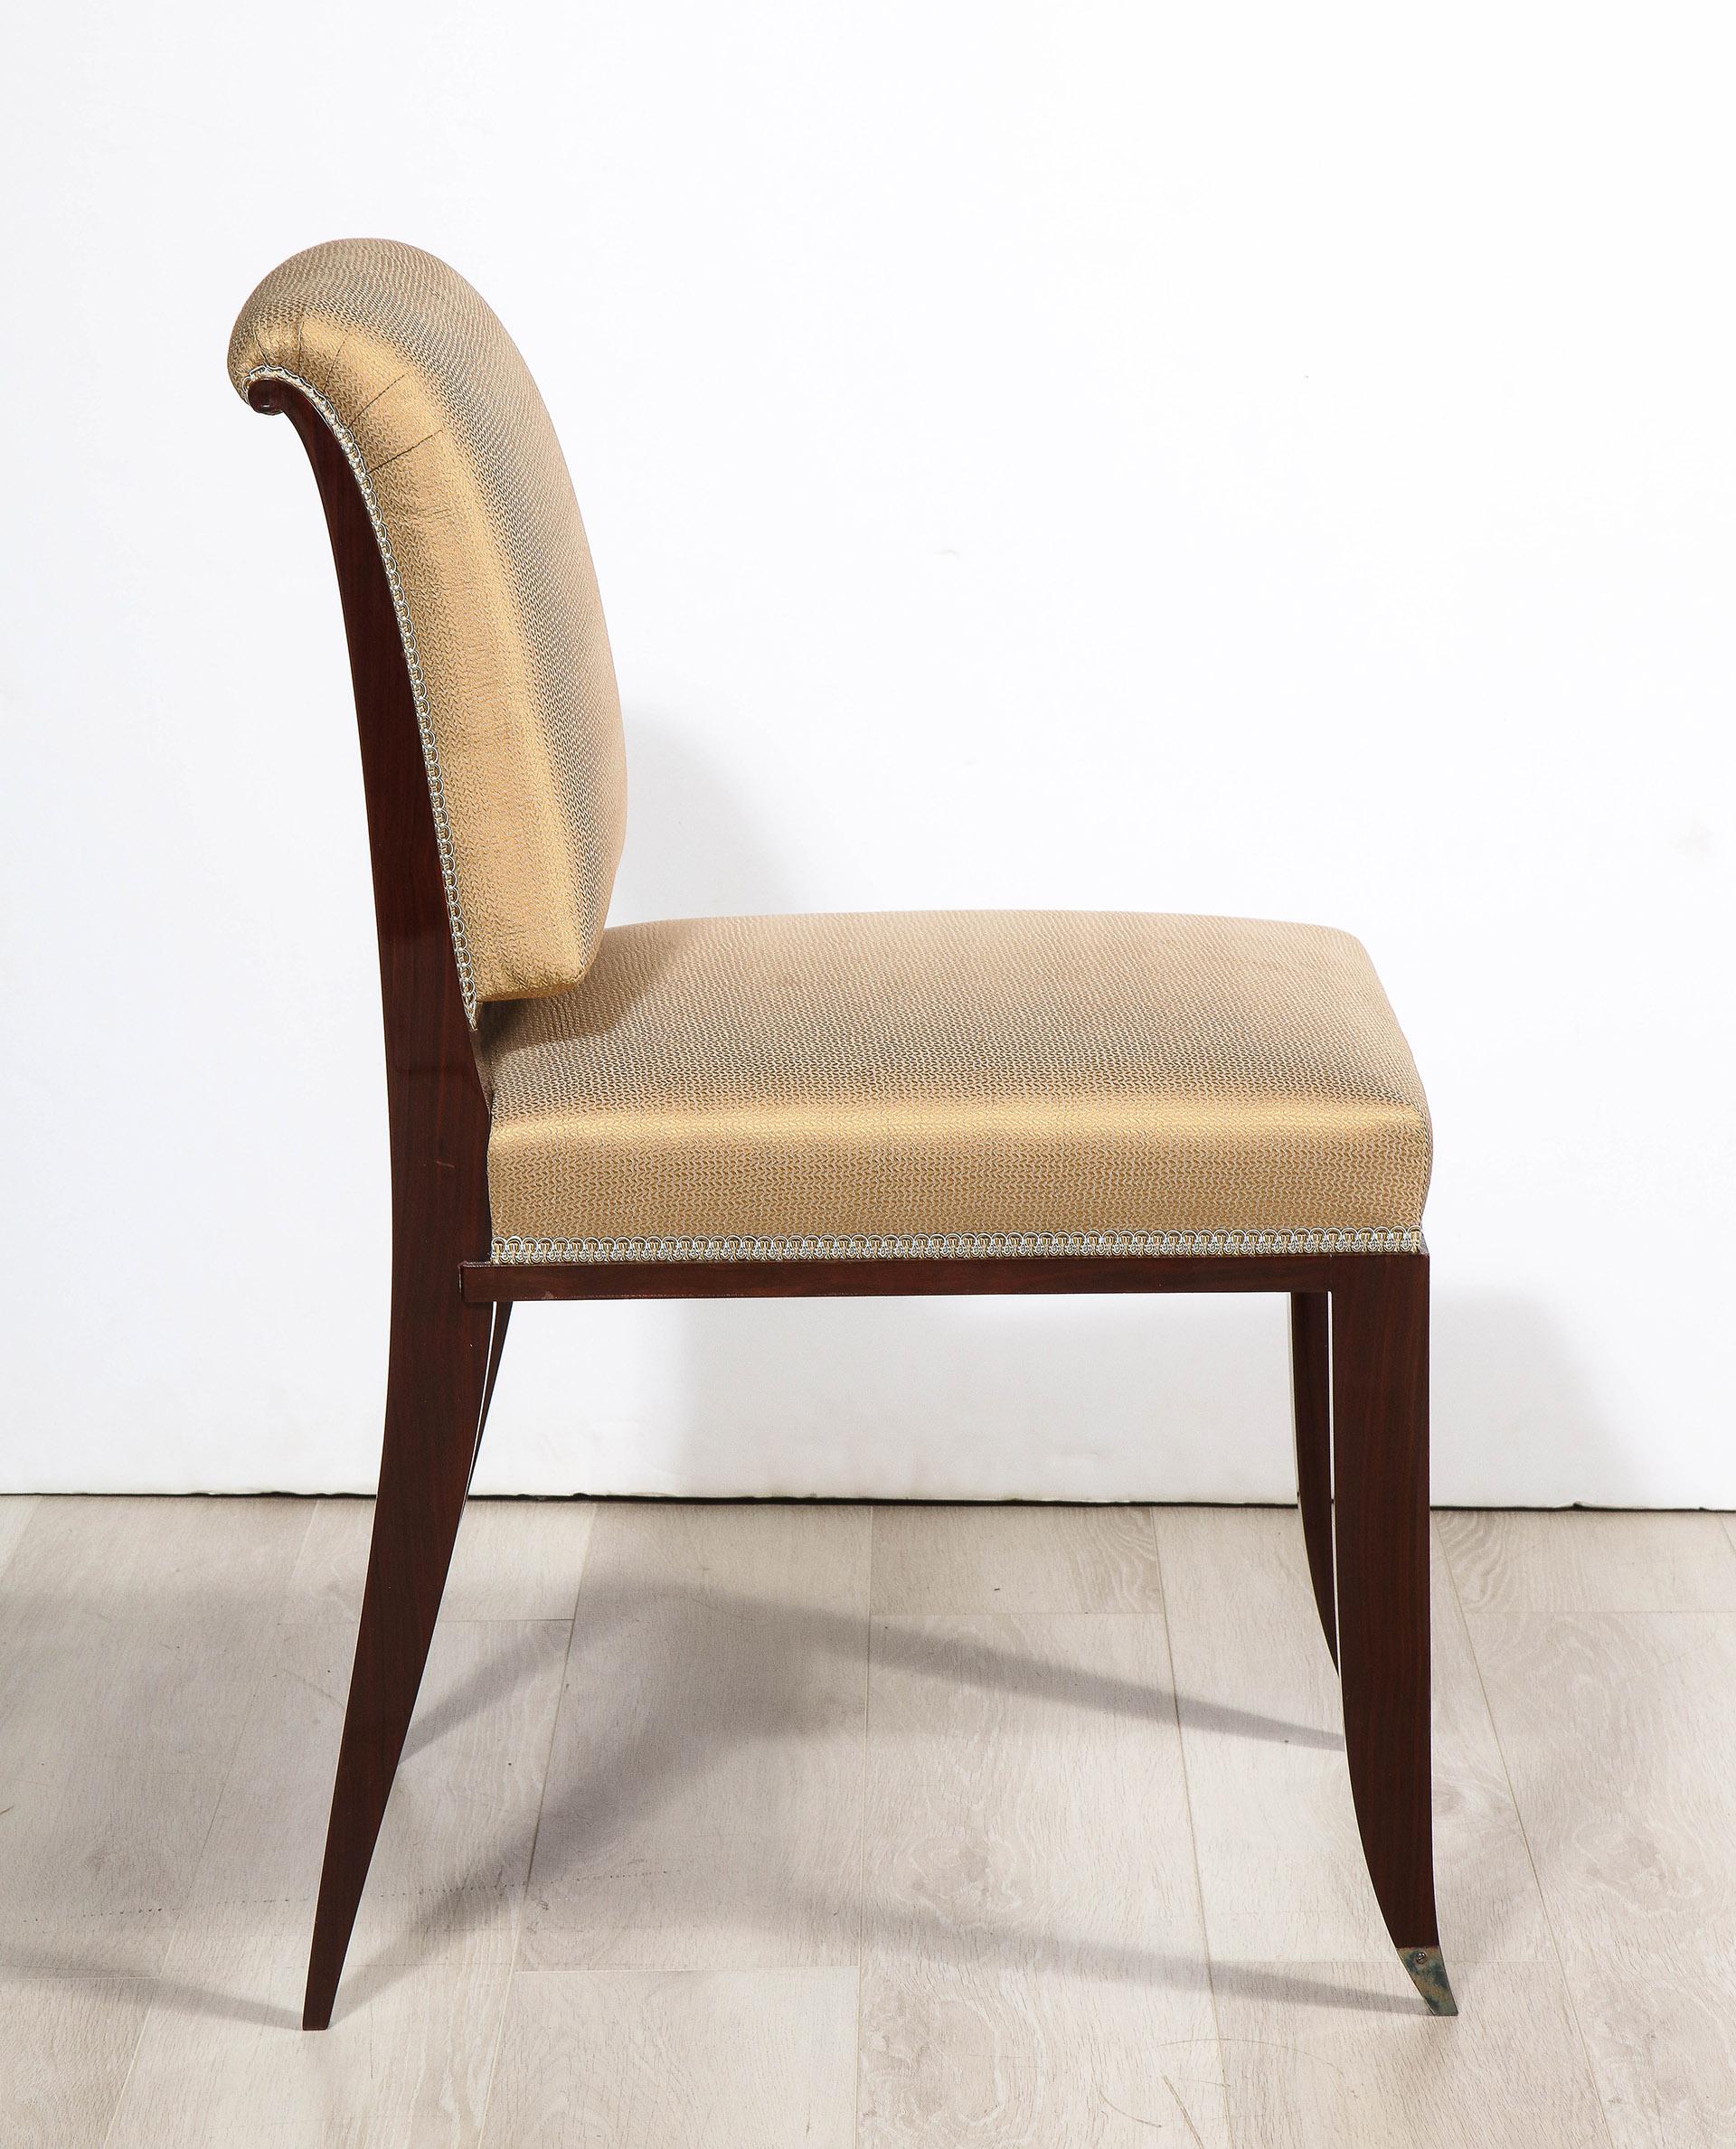 10 Mahogany Dining Chairs For Sale 2